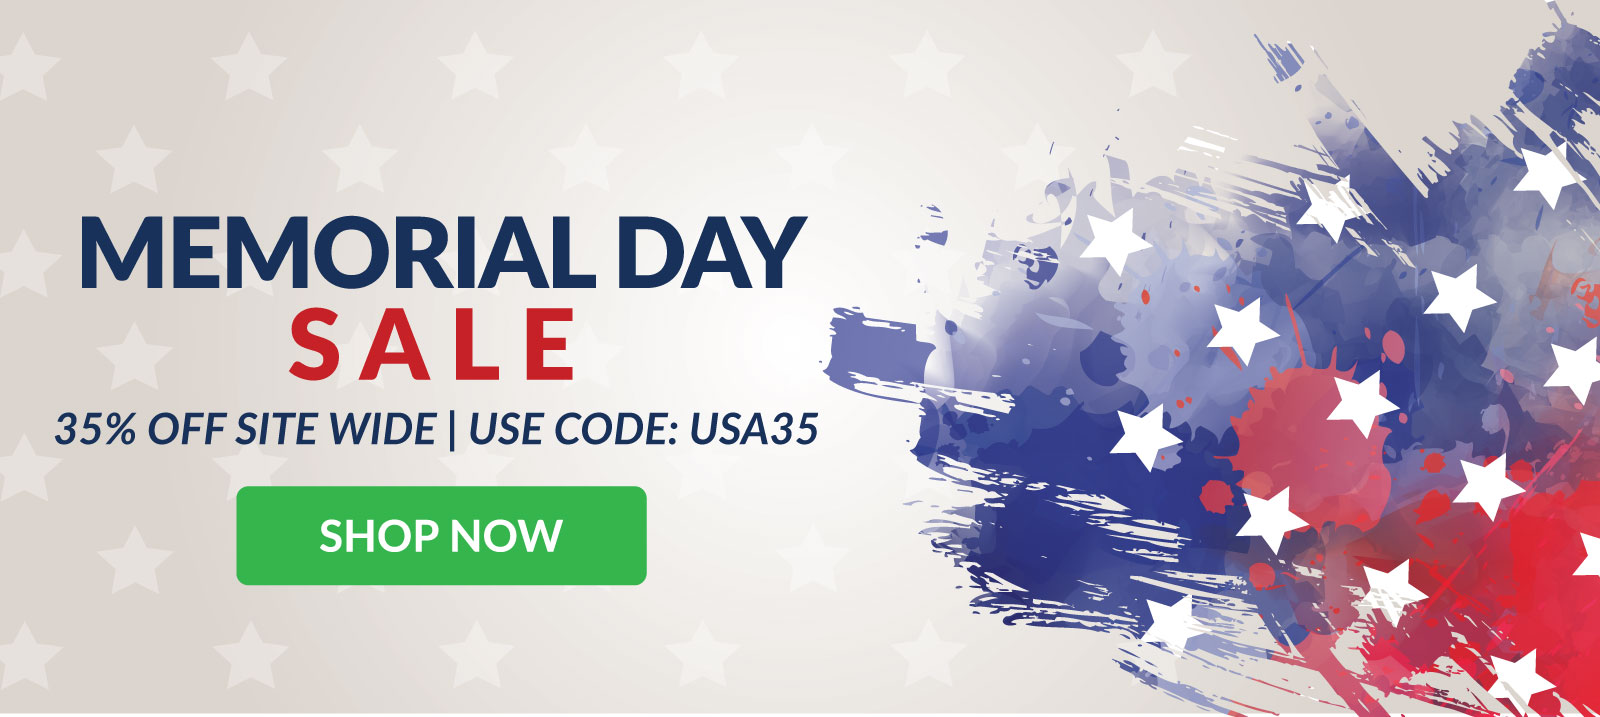 LIMITED TIME: Save 35% sitewide with code USA35 - no limits or minimums!